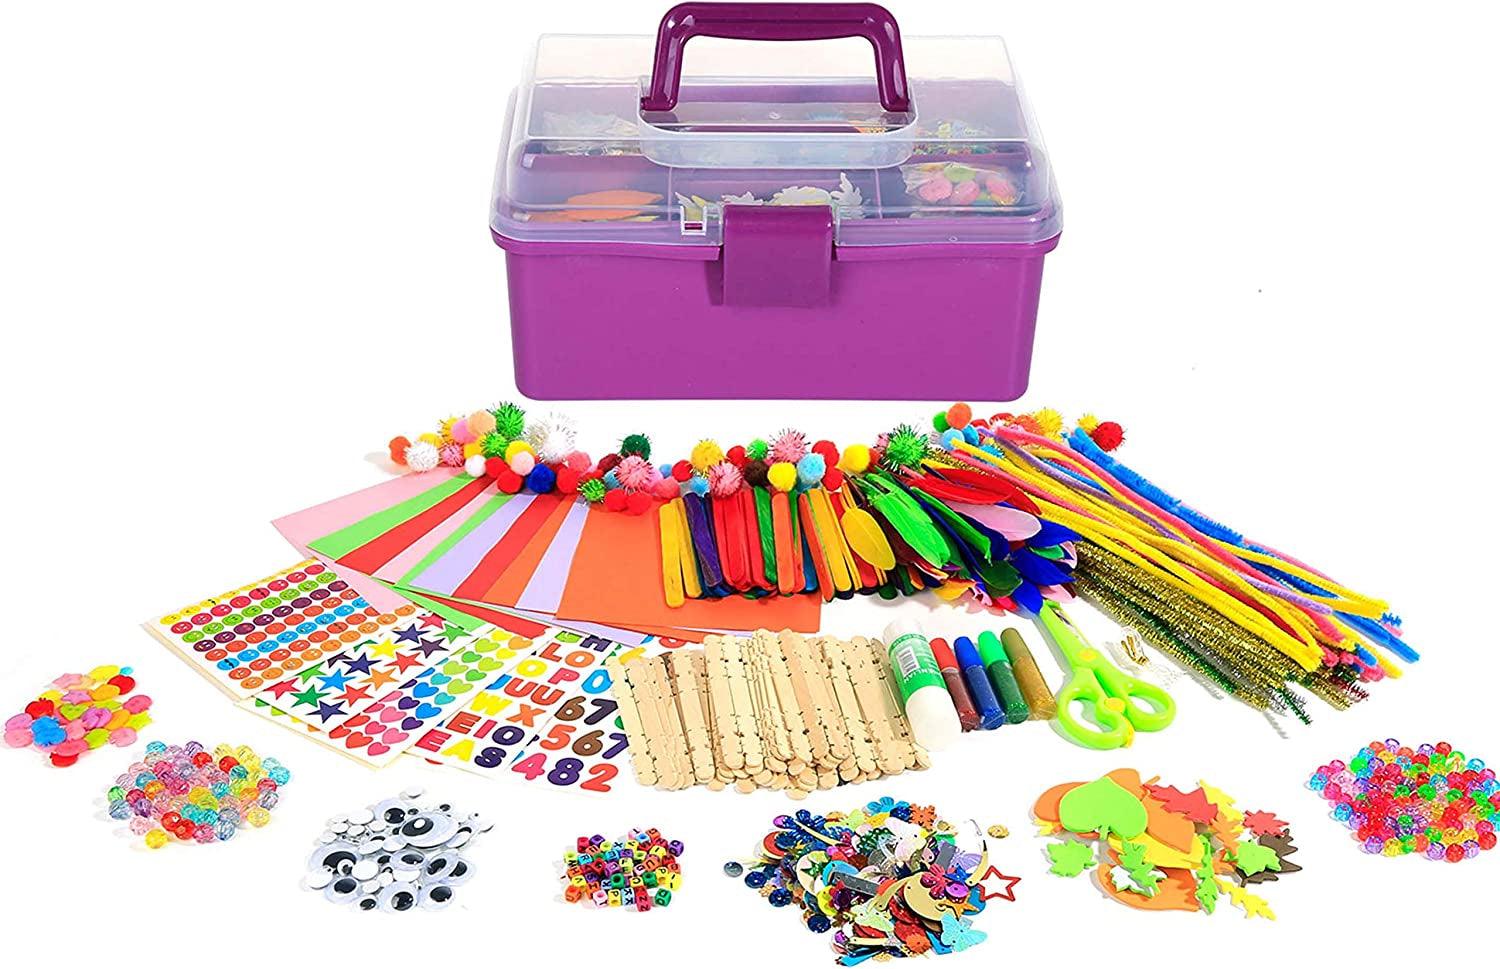 Arts and Crafts Vault – 1000+ Piece Craft Supplies Kit Library in